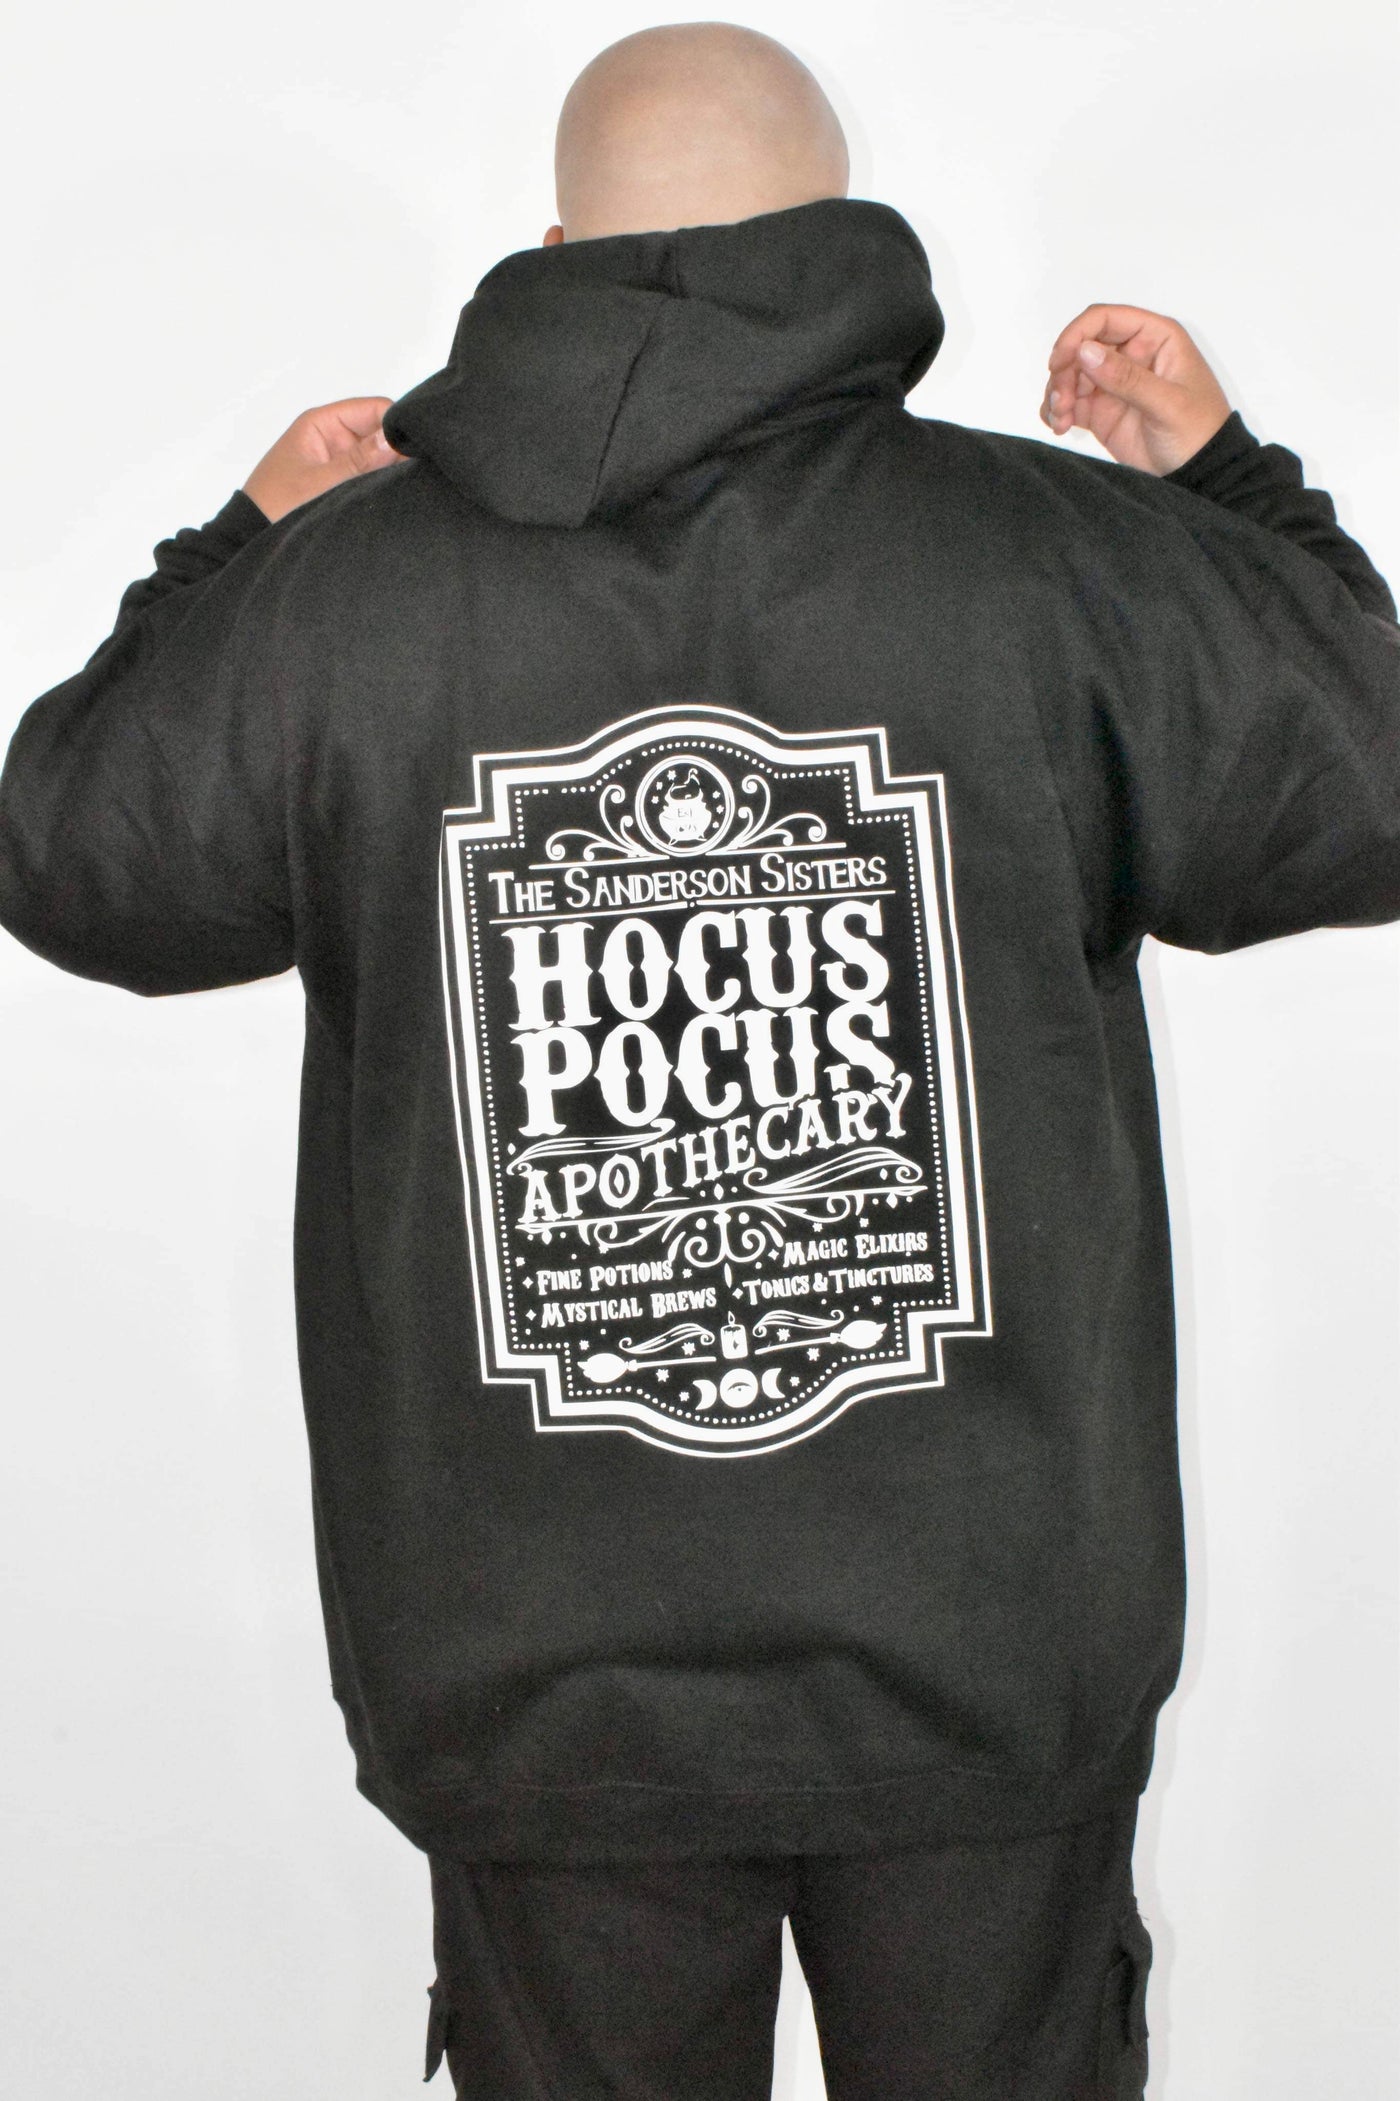 Front & Back Printed "Hocus Pocus Apothecary” Unisex Hoodie